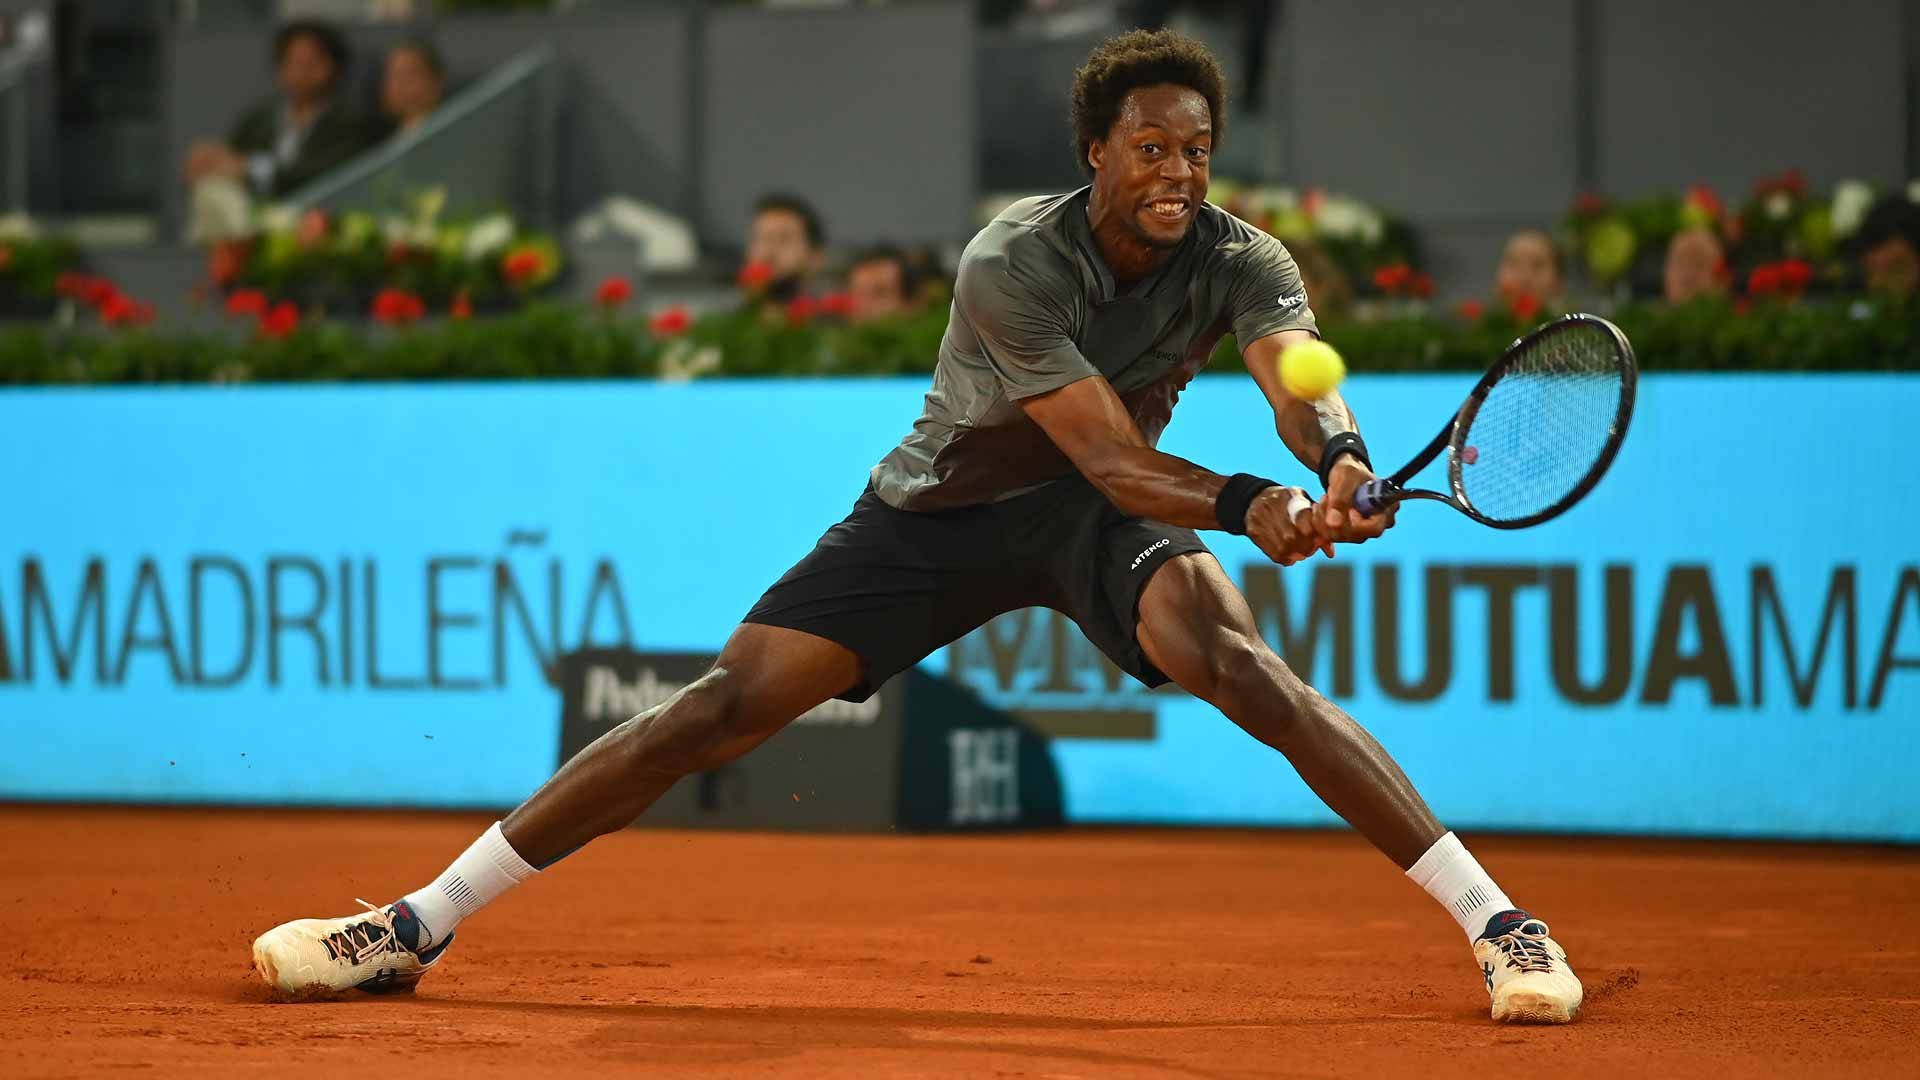 Caption: Gael Monfils in action on court Wallpaper